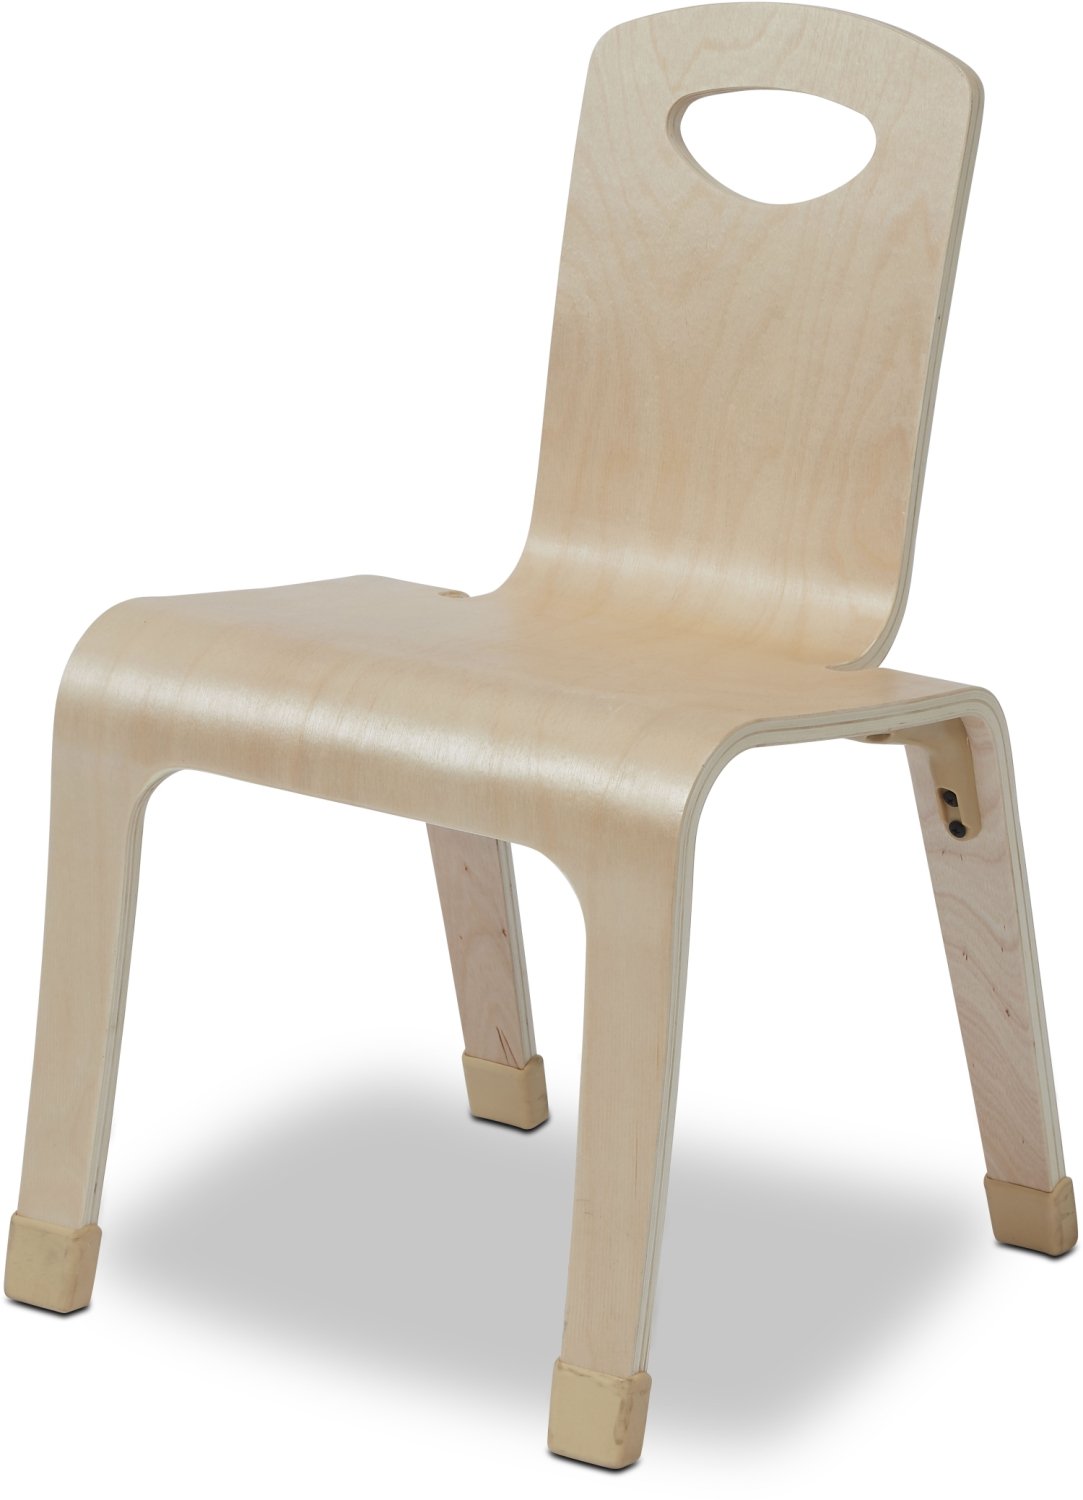 one piece chair x 4 H310